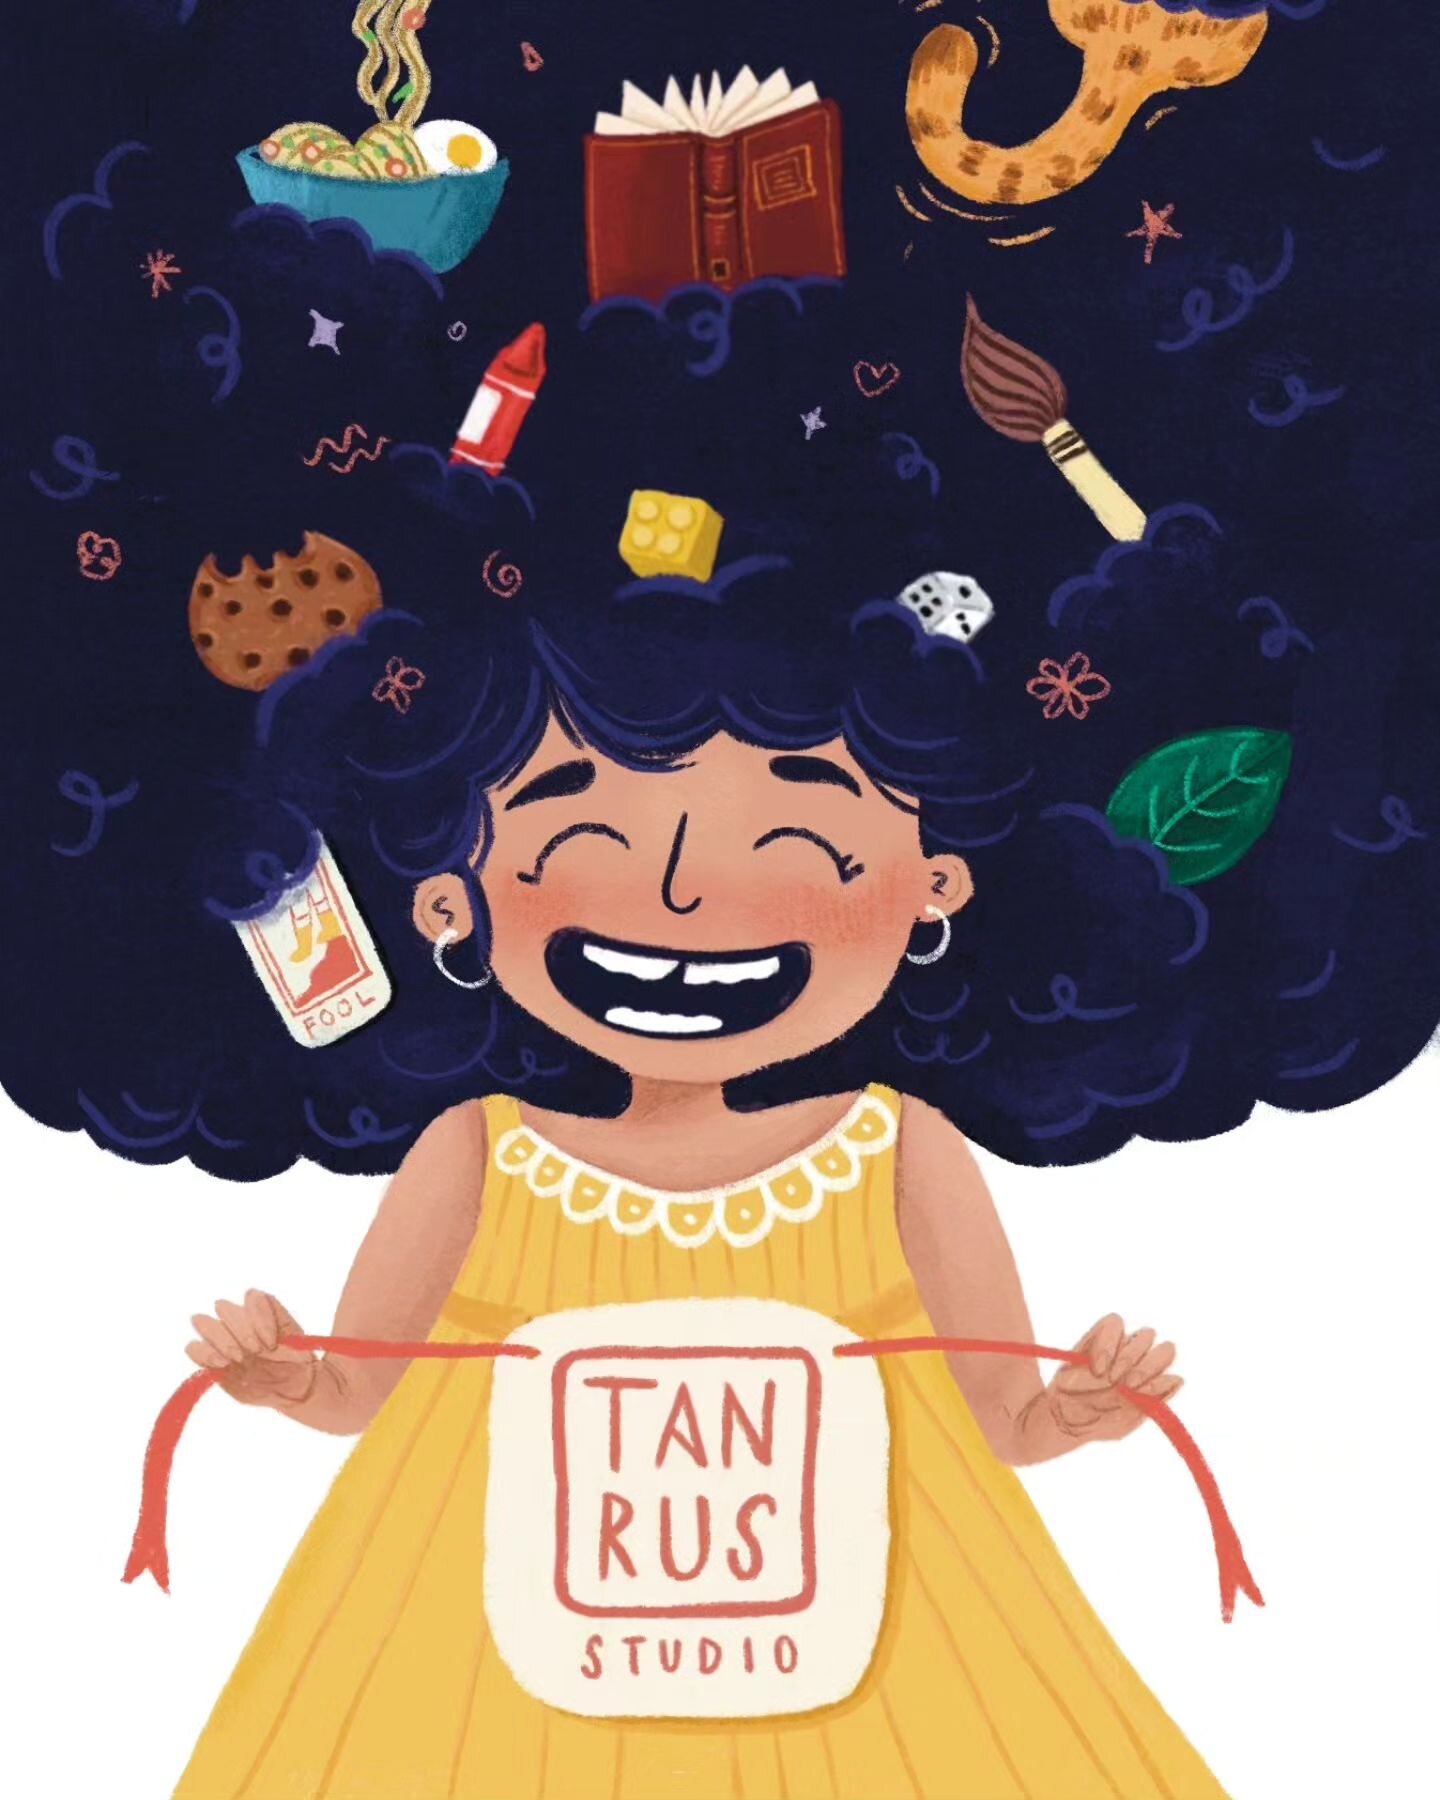 Finally, after quite a few iterations, this is my final business card design! Welcome to Tanrus.Studio 😊🔮

.
.
.
.

Big hello to all literary agents, looking for representation! 

#kidlitpostcardday #kidlitpostcard #kidlitart #kidlitillustration #c